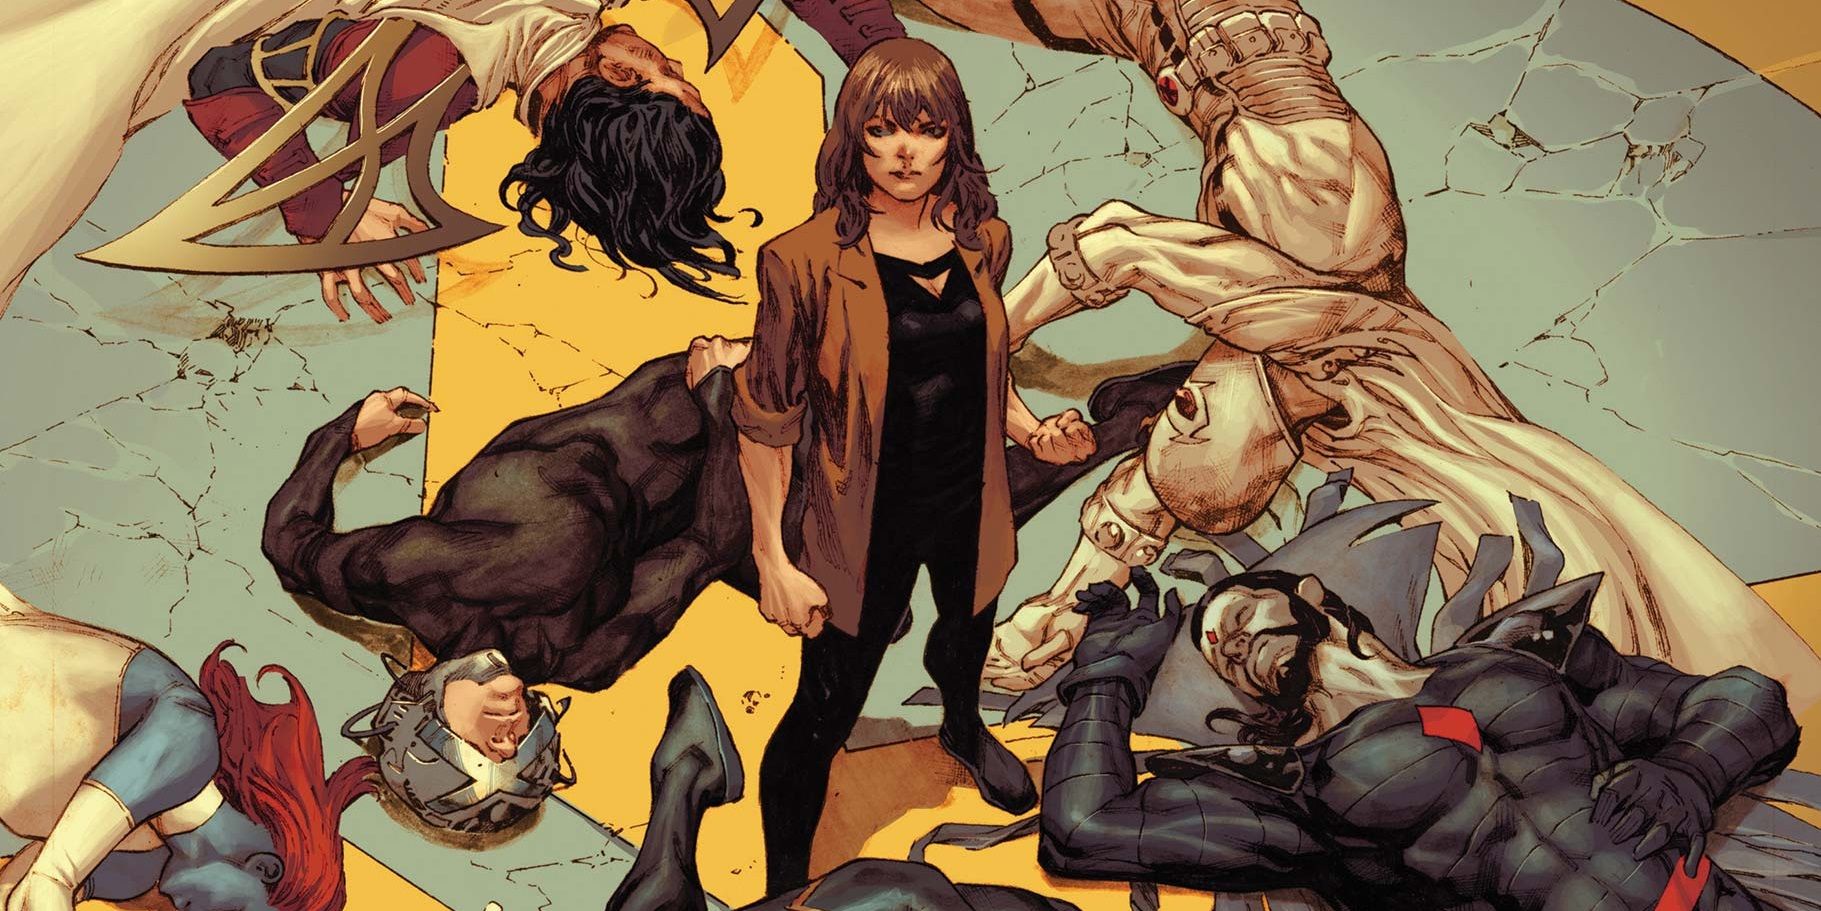 Moira MacTaggert stands over the X-Men on the cover of Inferno 1 by Jerome Opena